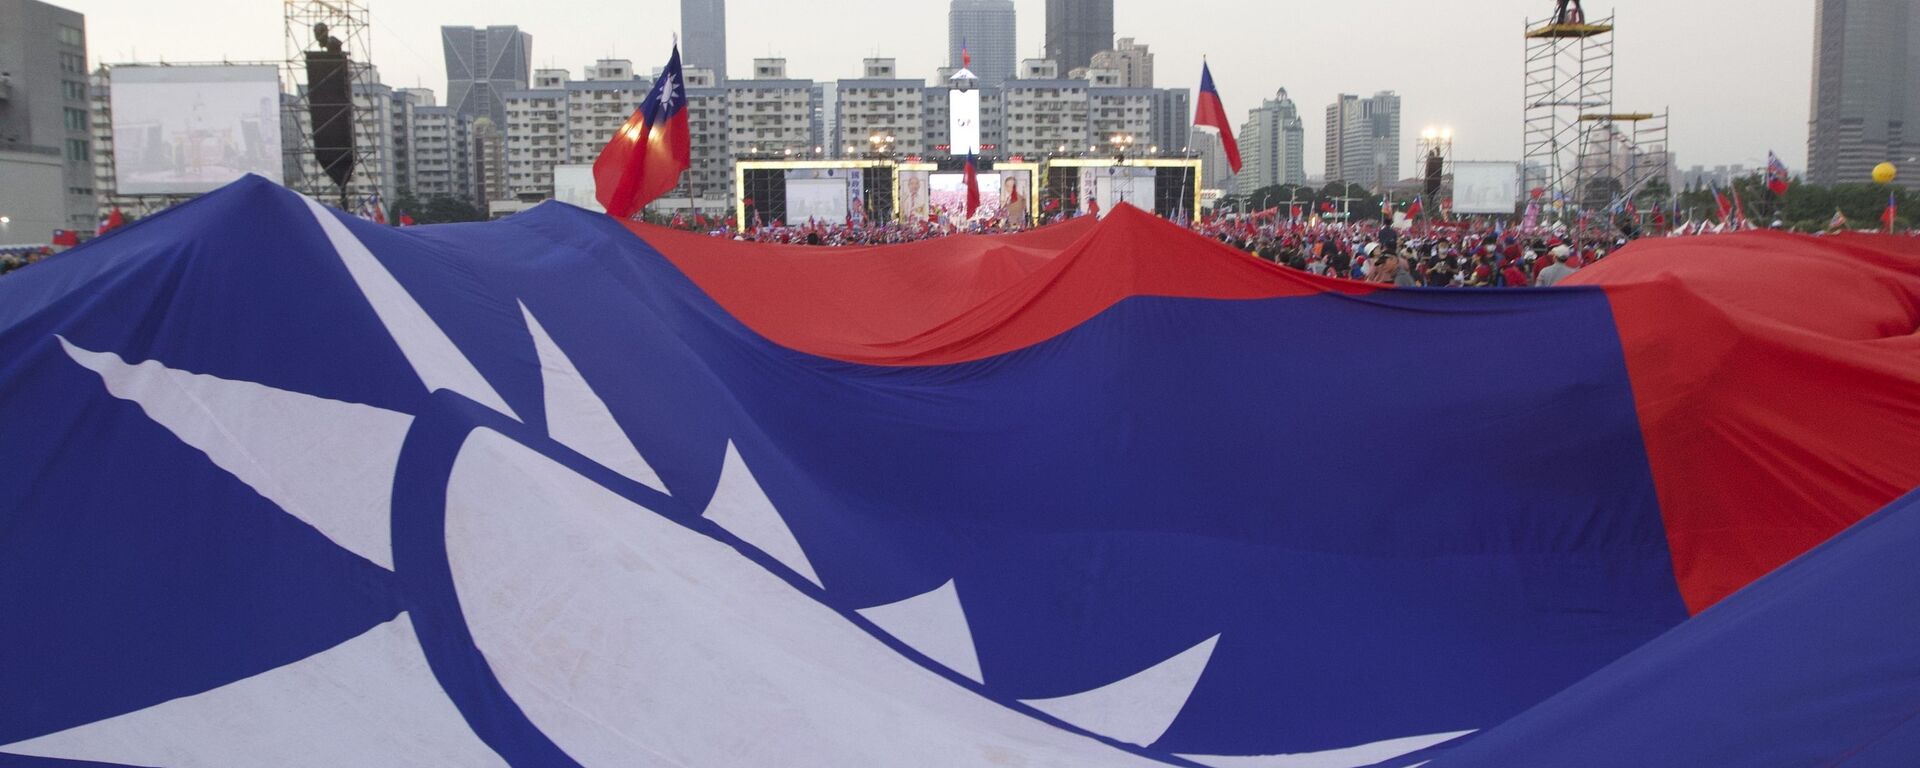 Supporters of Taiwan's 2020 presidential election candidate for the KMT, or Nationalist Party, Han Kuo-yu pass along a giant Taiwanese flag for the start of a campaign rally in southern Taiwan's Kaohsiung city on Friday, Jan 10, 2020 - Sputnik International, 1920, 23.11.2021